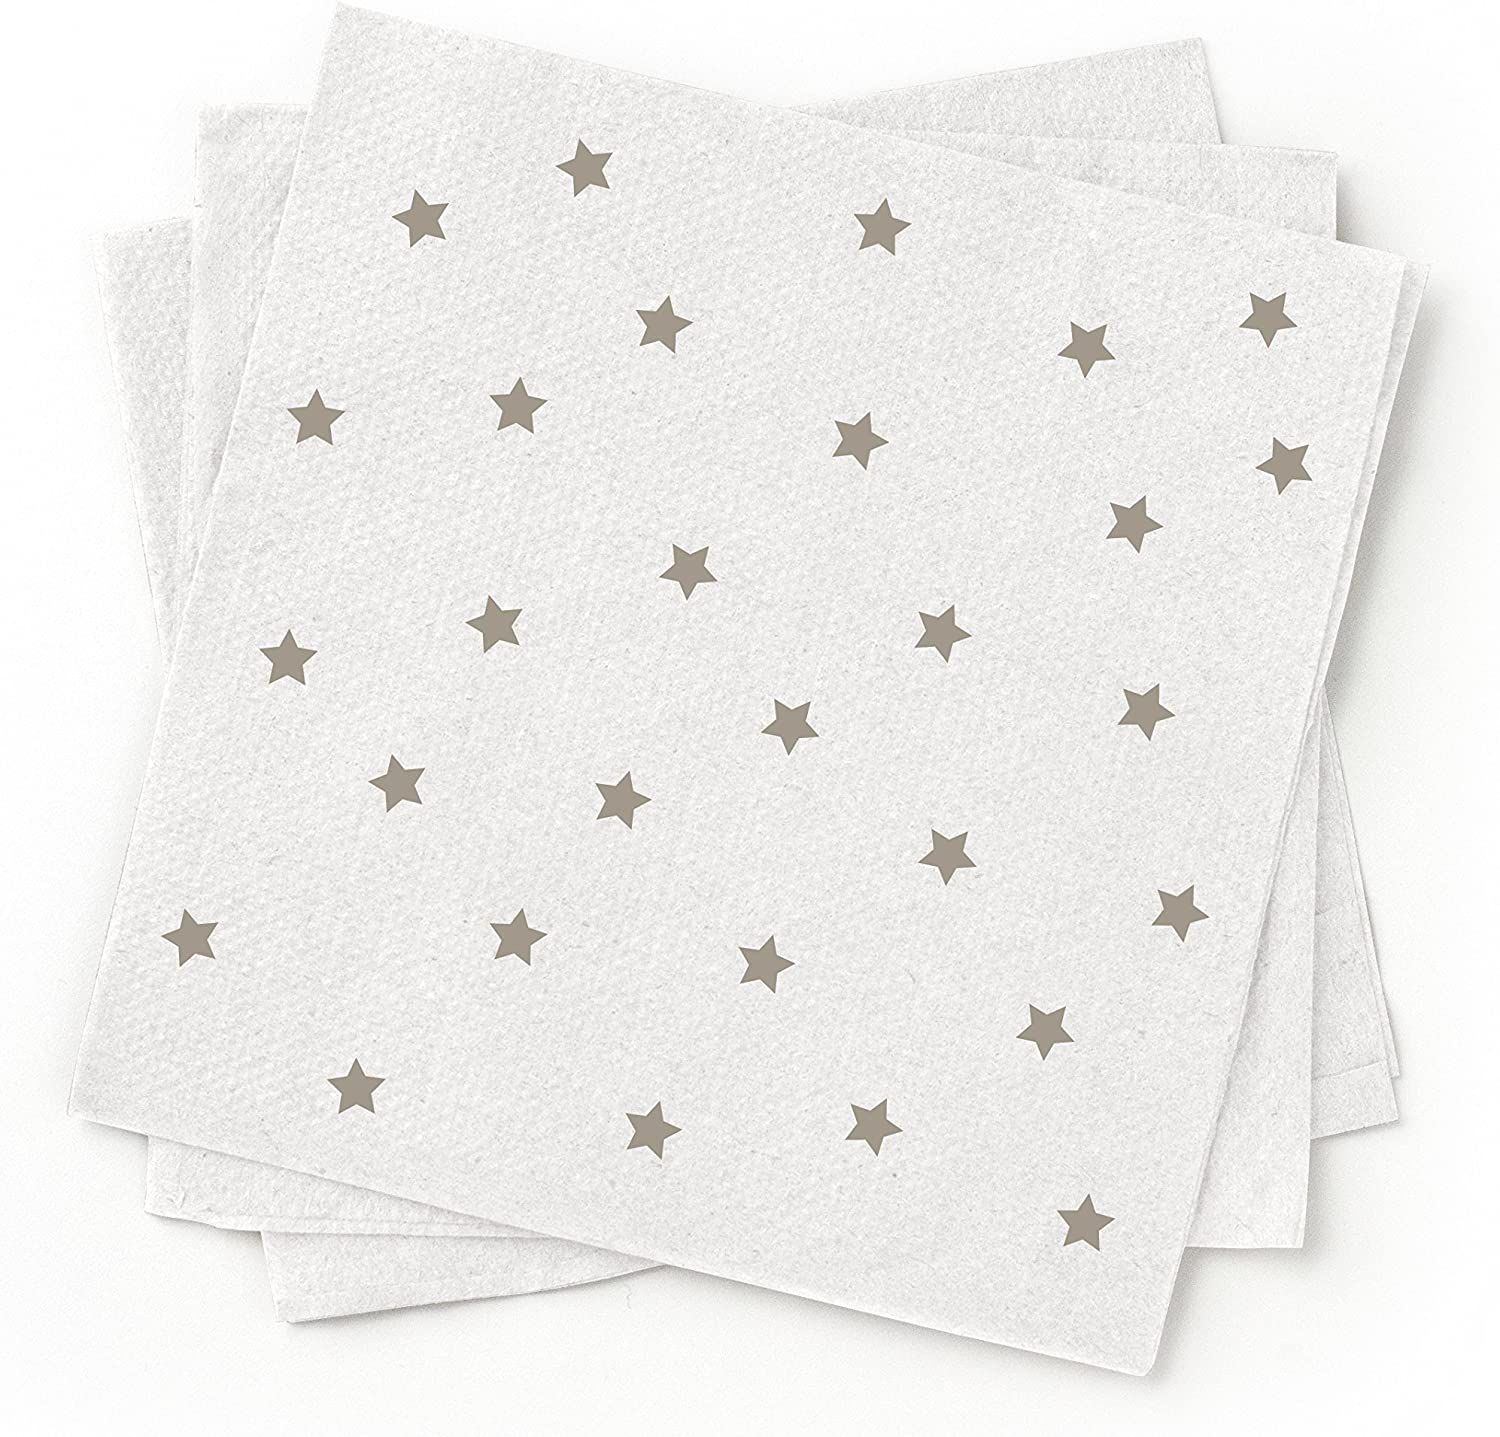 Susty Party SPNPCTGRY Napkins, Pack of 200, silver, grey, white | Amazon (US)